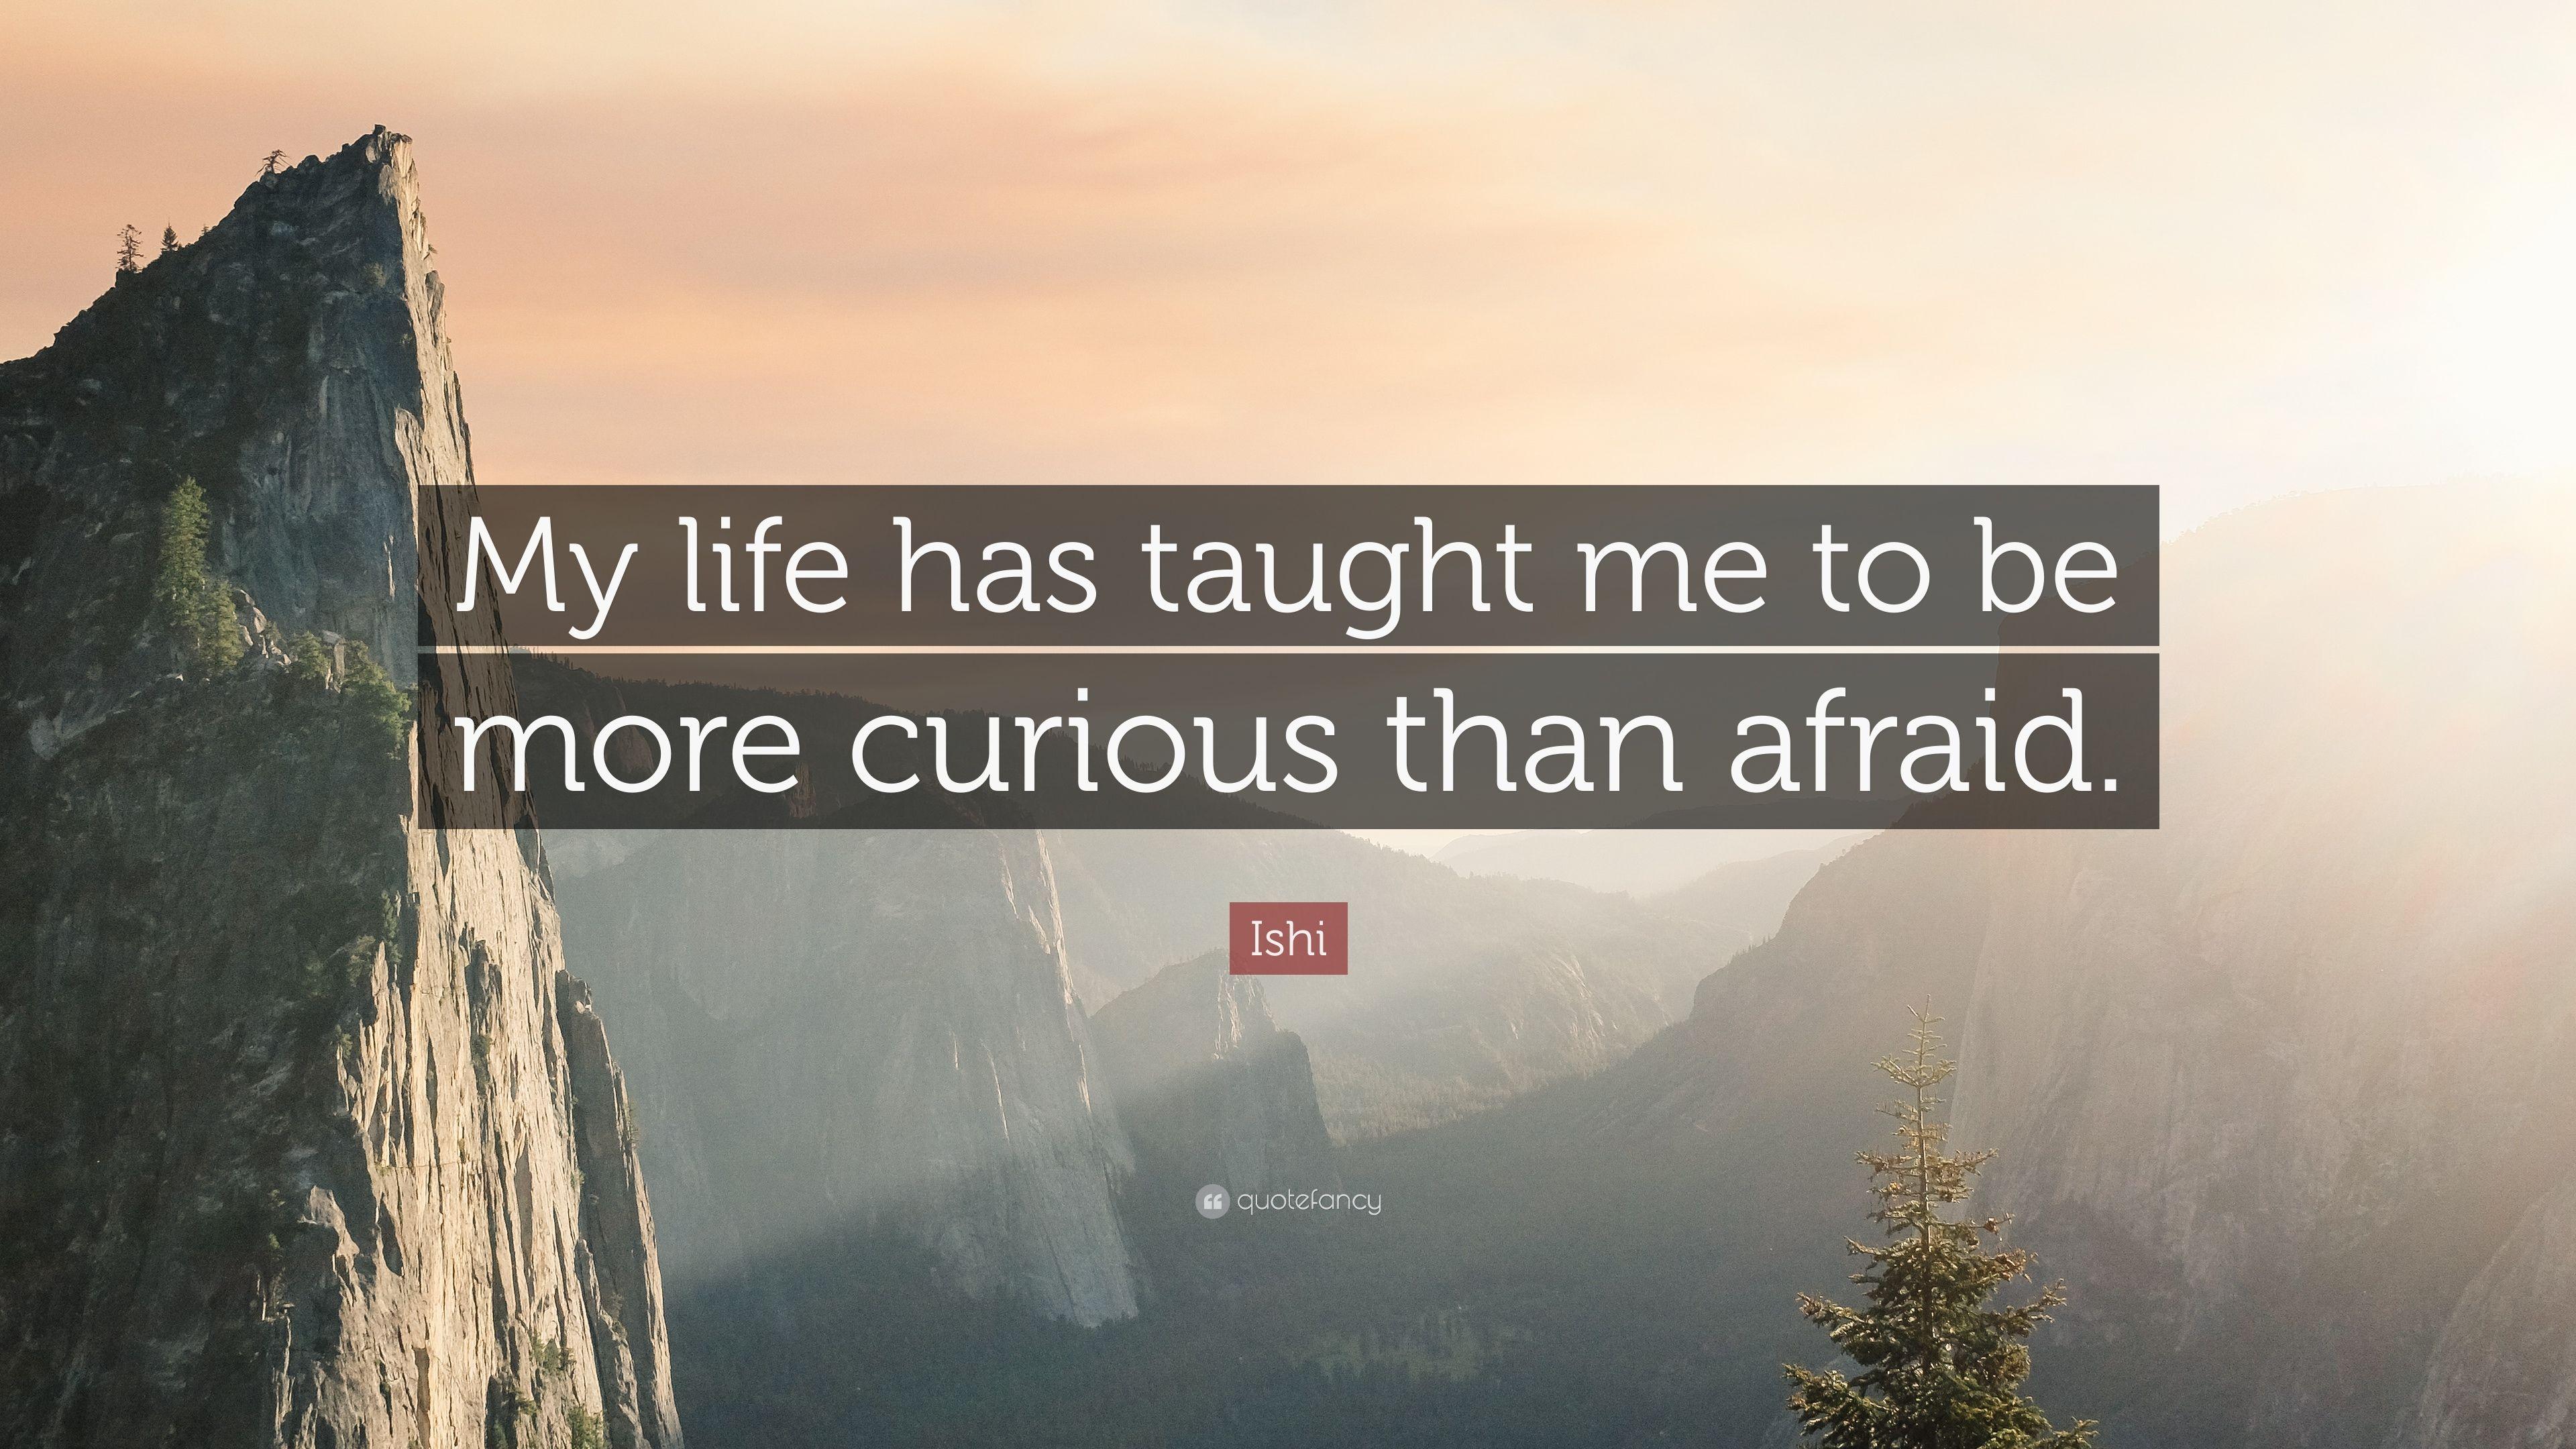 Ishi Quote: “My life has taught me to be more curious than afraid